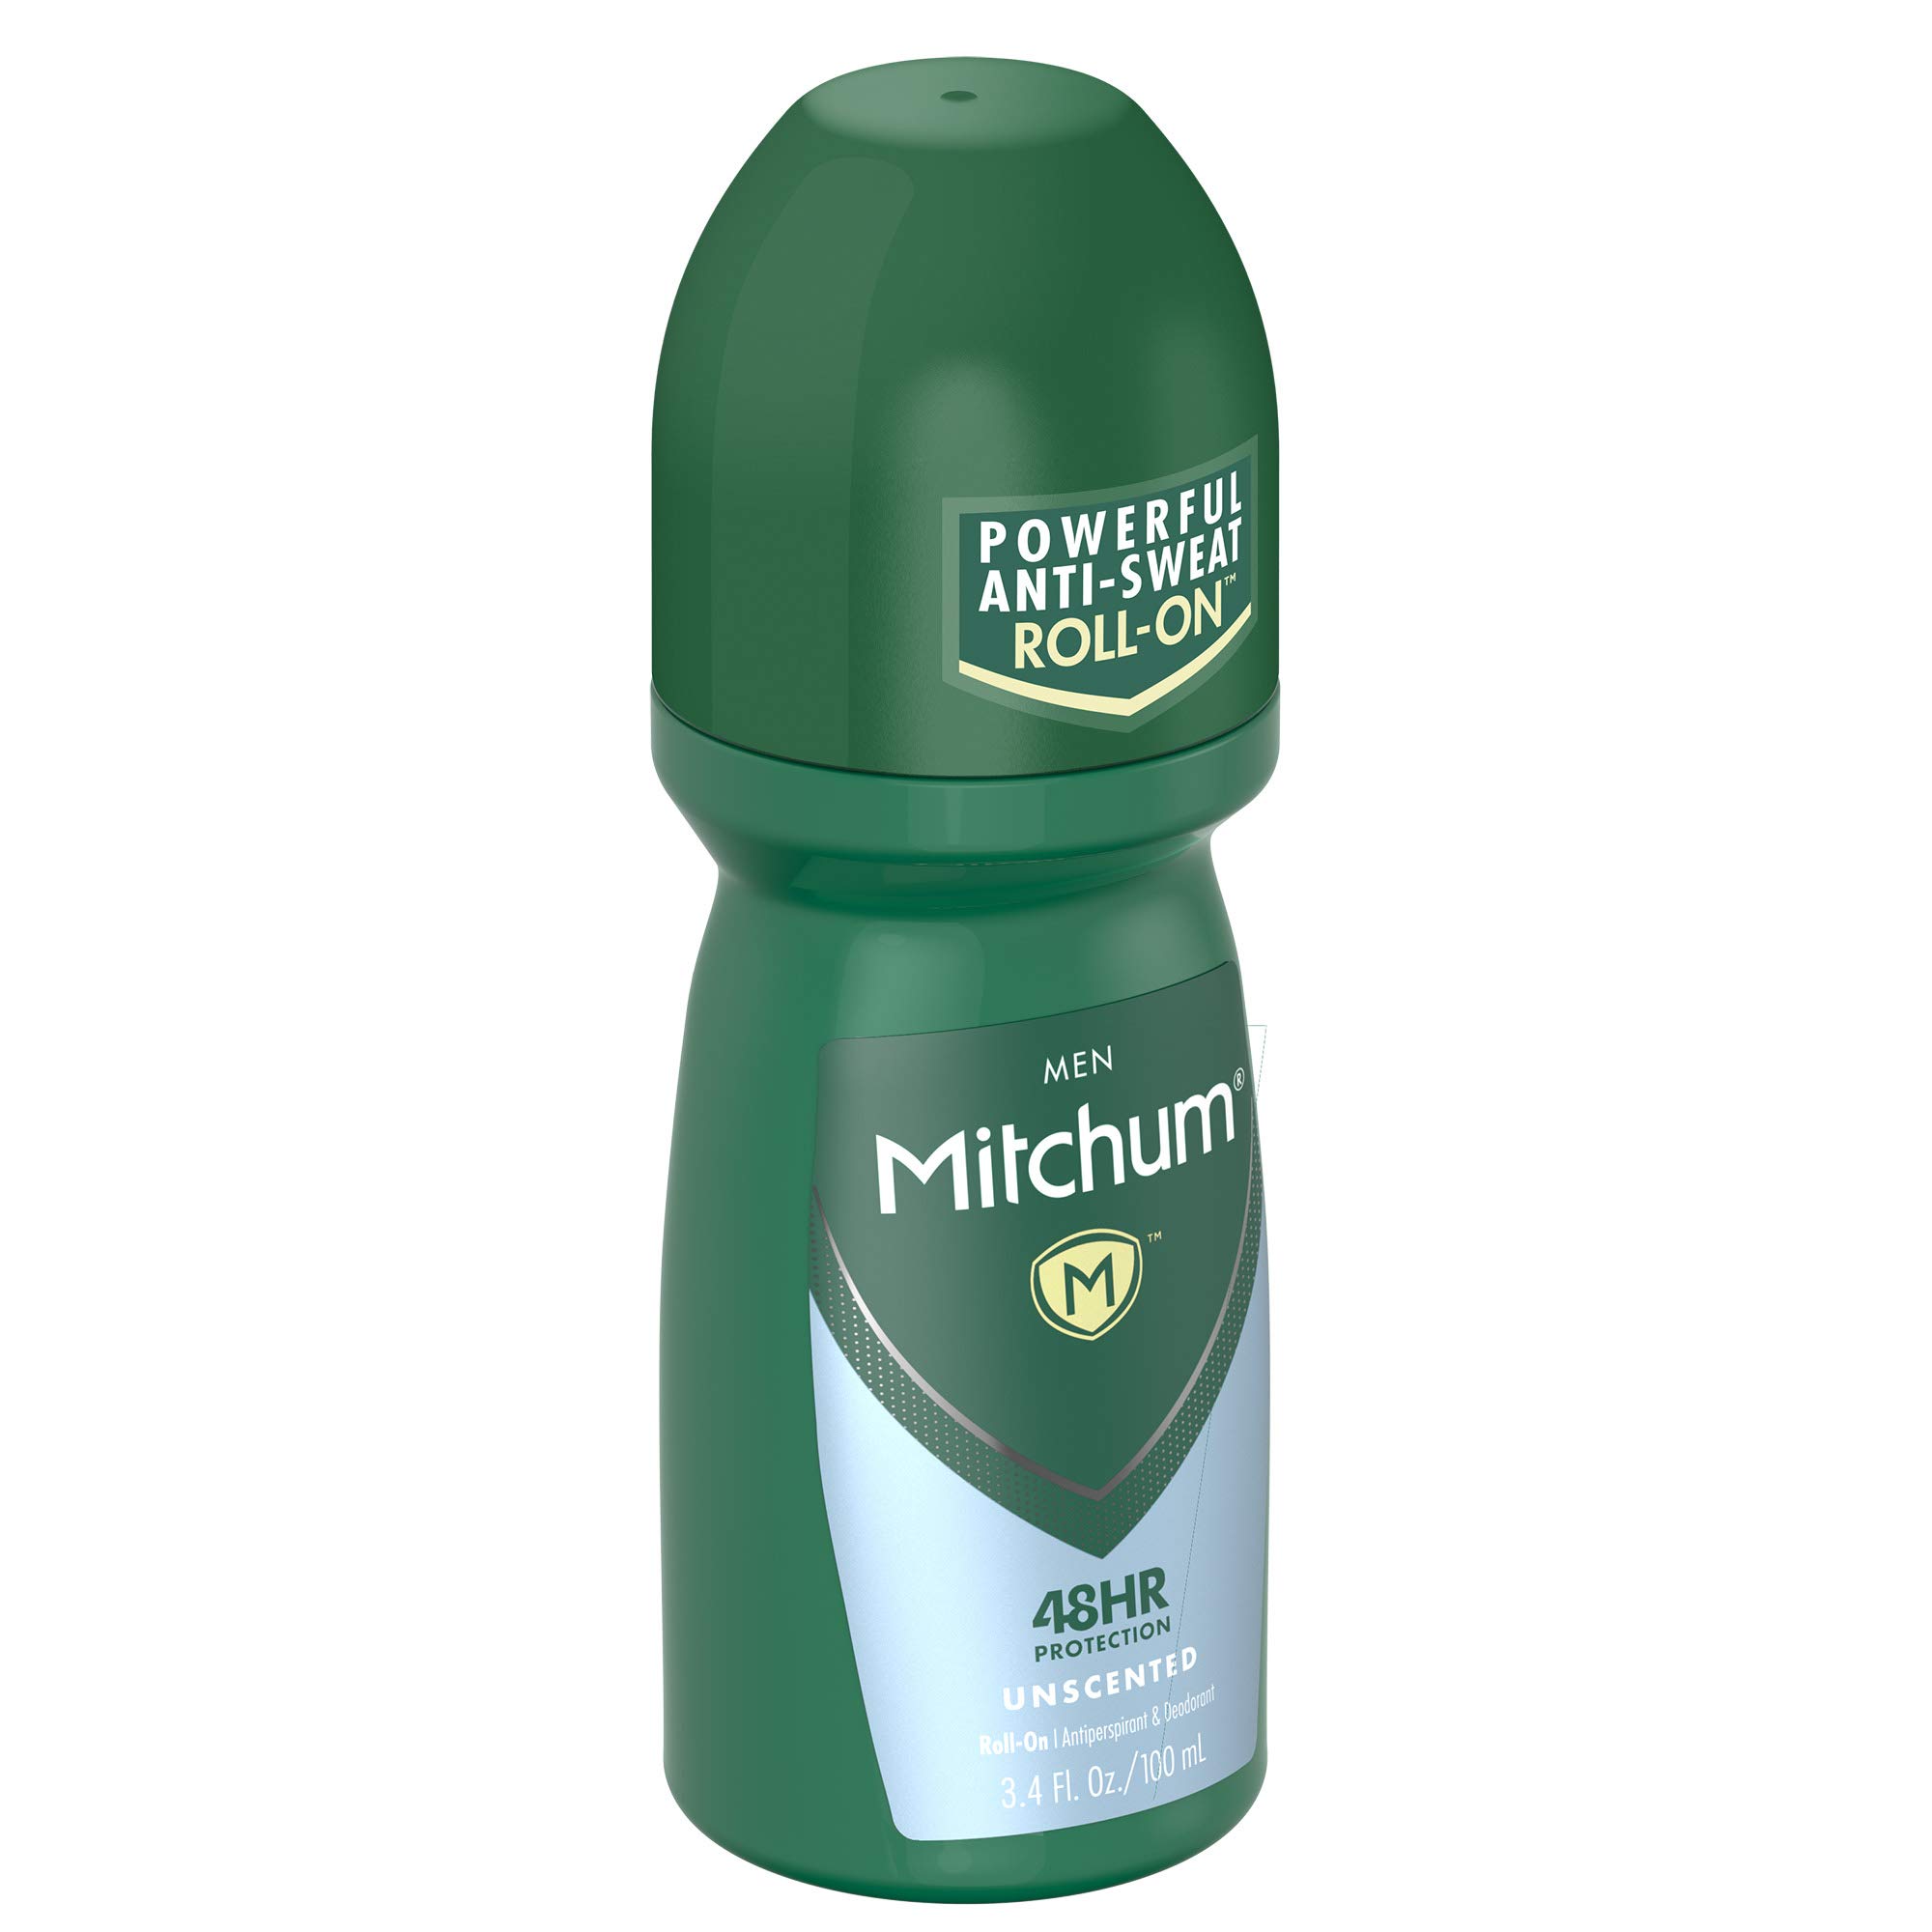 Mitchum Antiperspirant Deodorant Roll On for Men, 48 Hr Protection, Dermatologist Tested, Unscented, 3.4 oz